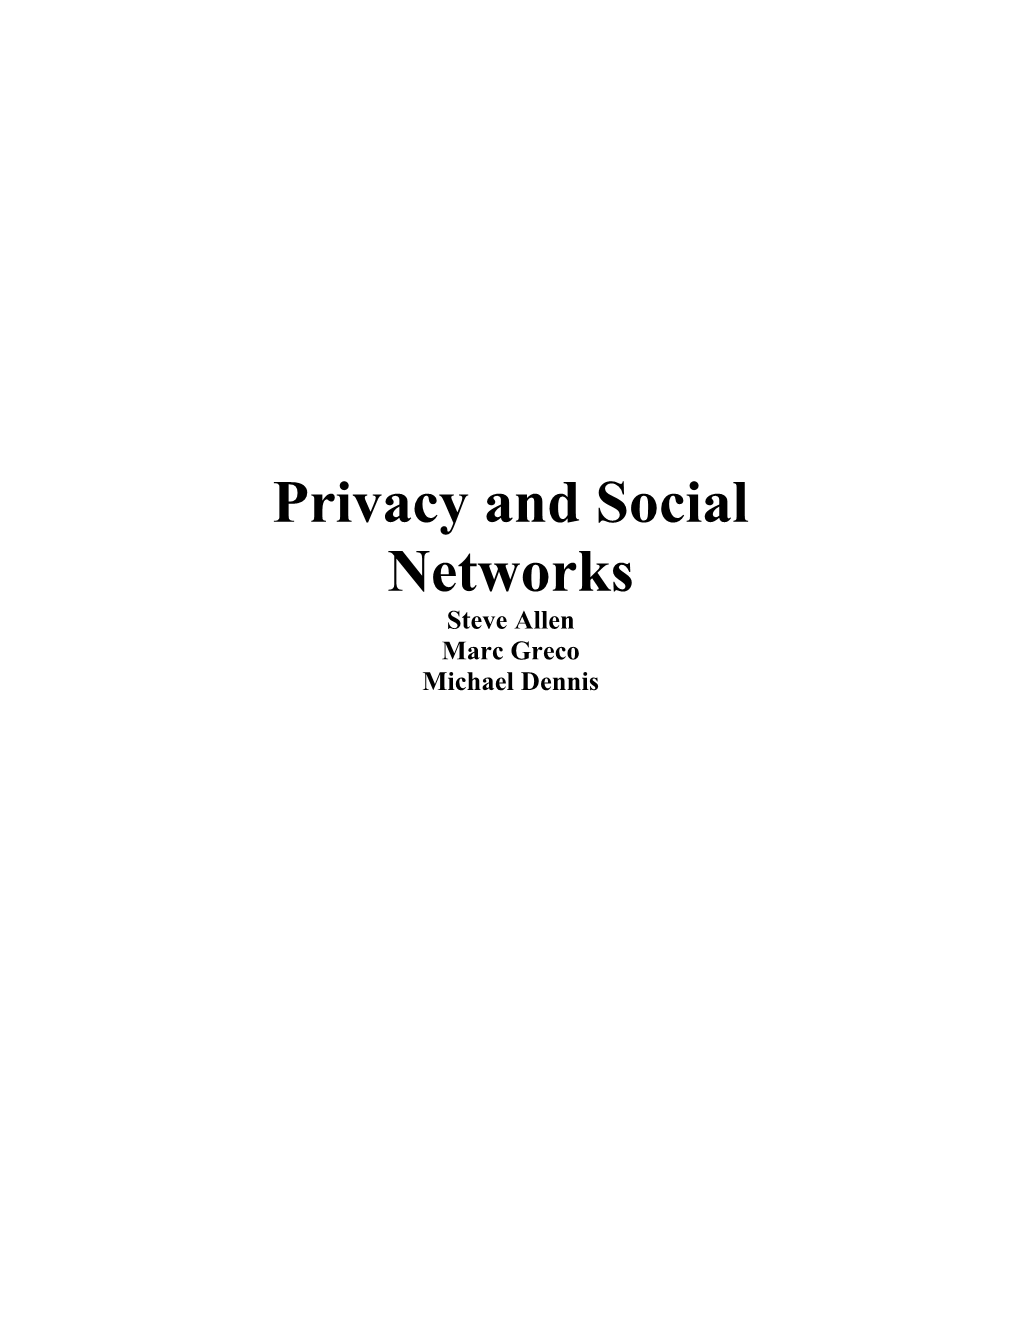 Privacy and Social Networks